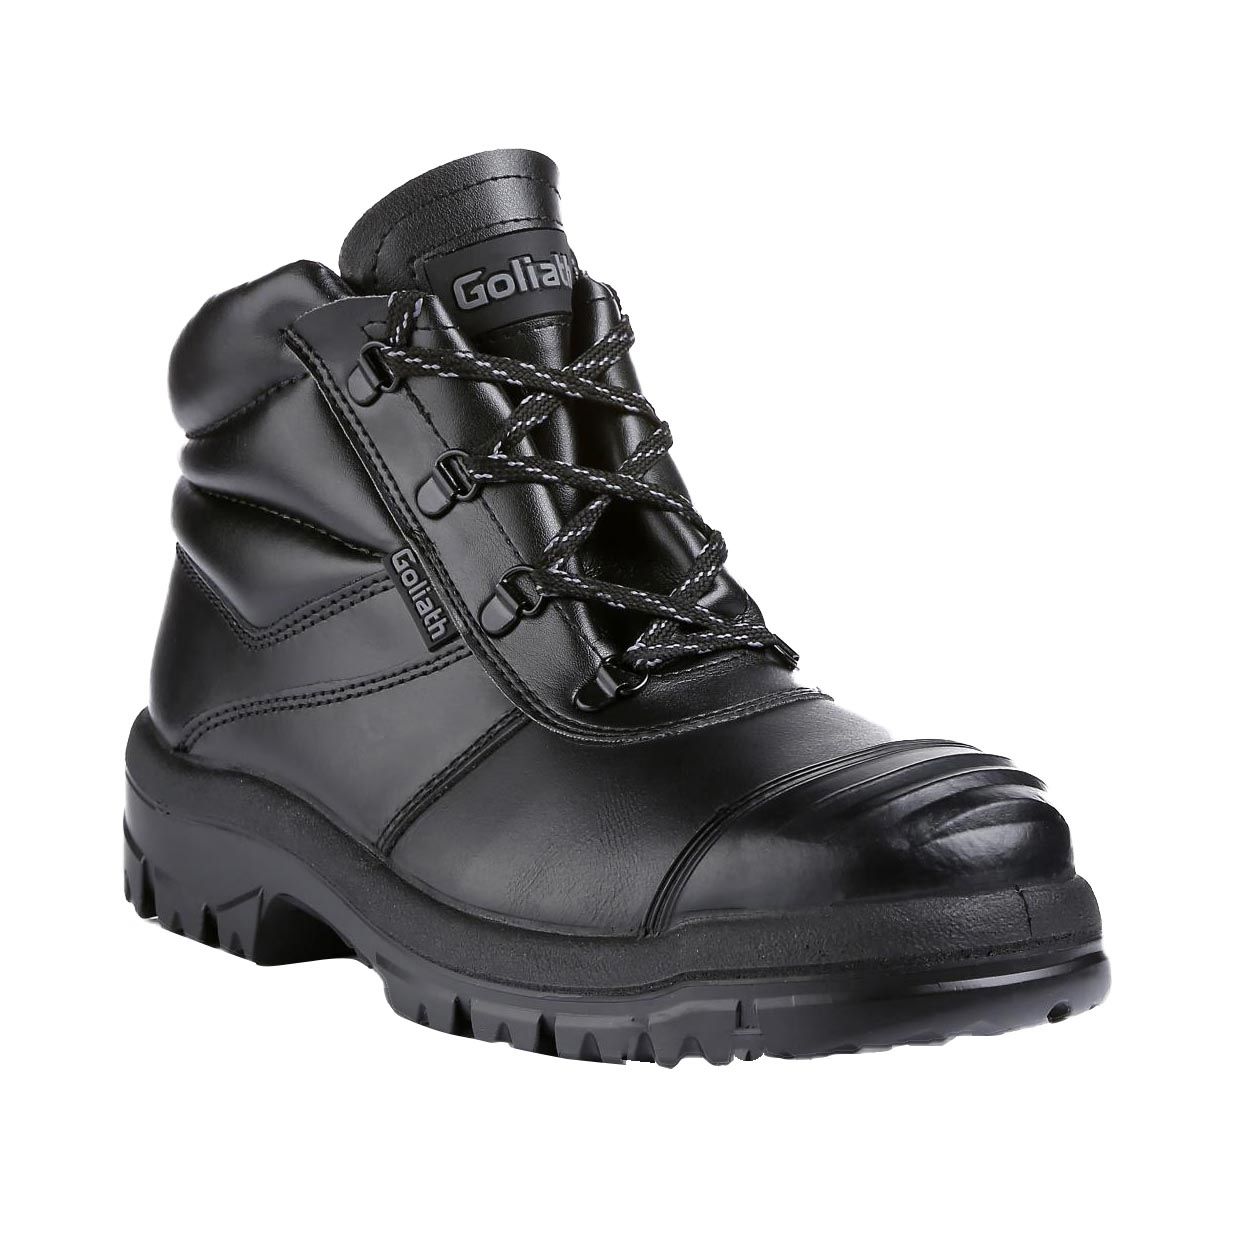 CHUKKA SAFETY WORK BOOT LEATHER STEEL TOE CAP CLICK BLACK MENS/LADIES SIZES 3-13 